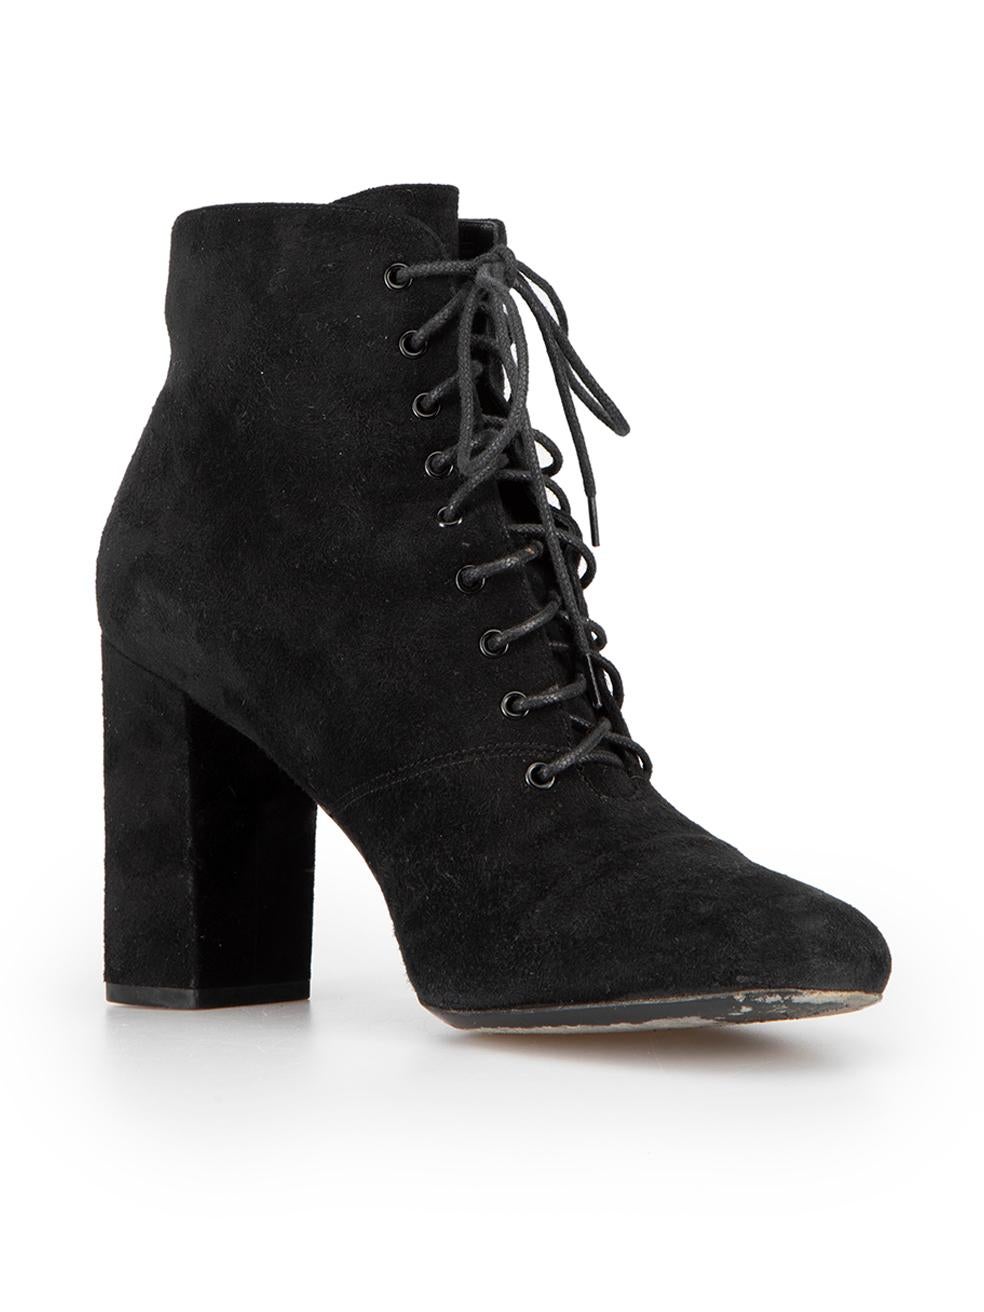 CONDITION is Very good. Minimal wear to boots is evident. Minimal wear to both heels with scuff marks on this used Saint Laurent designer resale item.



Details


Black

Suede

High heeled ankle boots

Round toe

Lace-up fastening



 

Made in